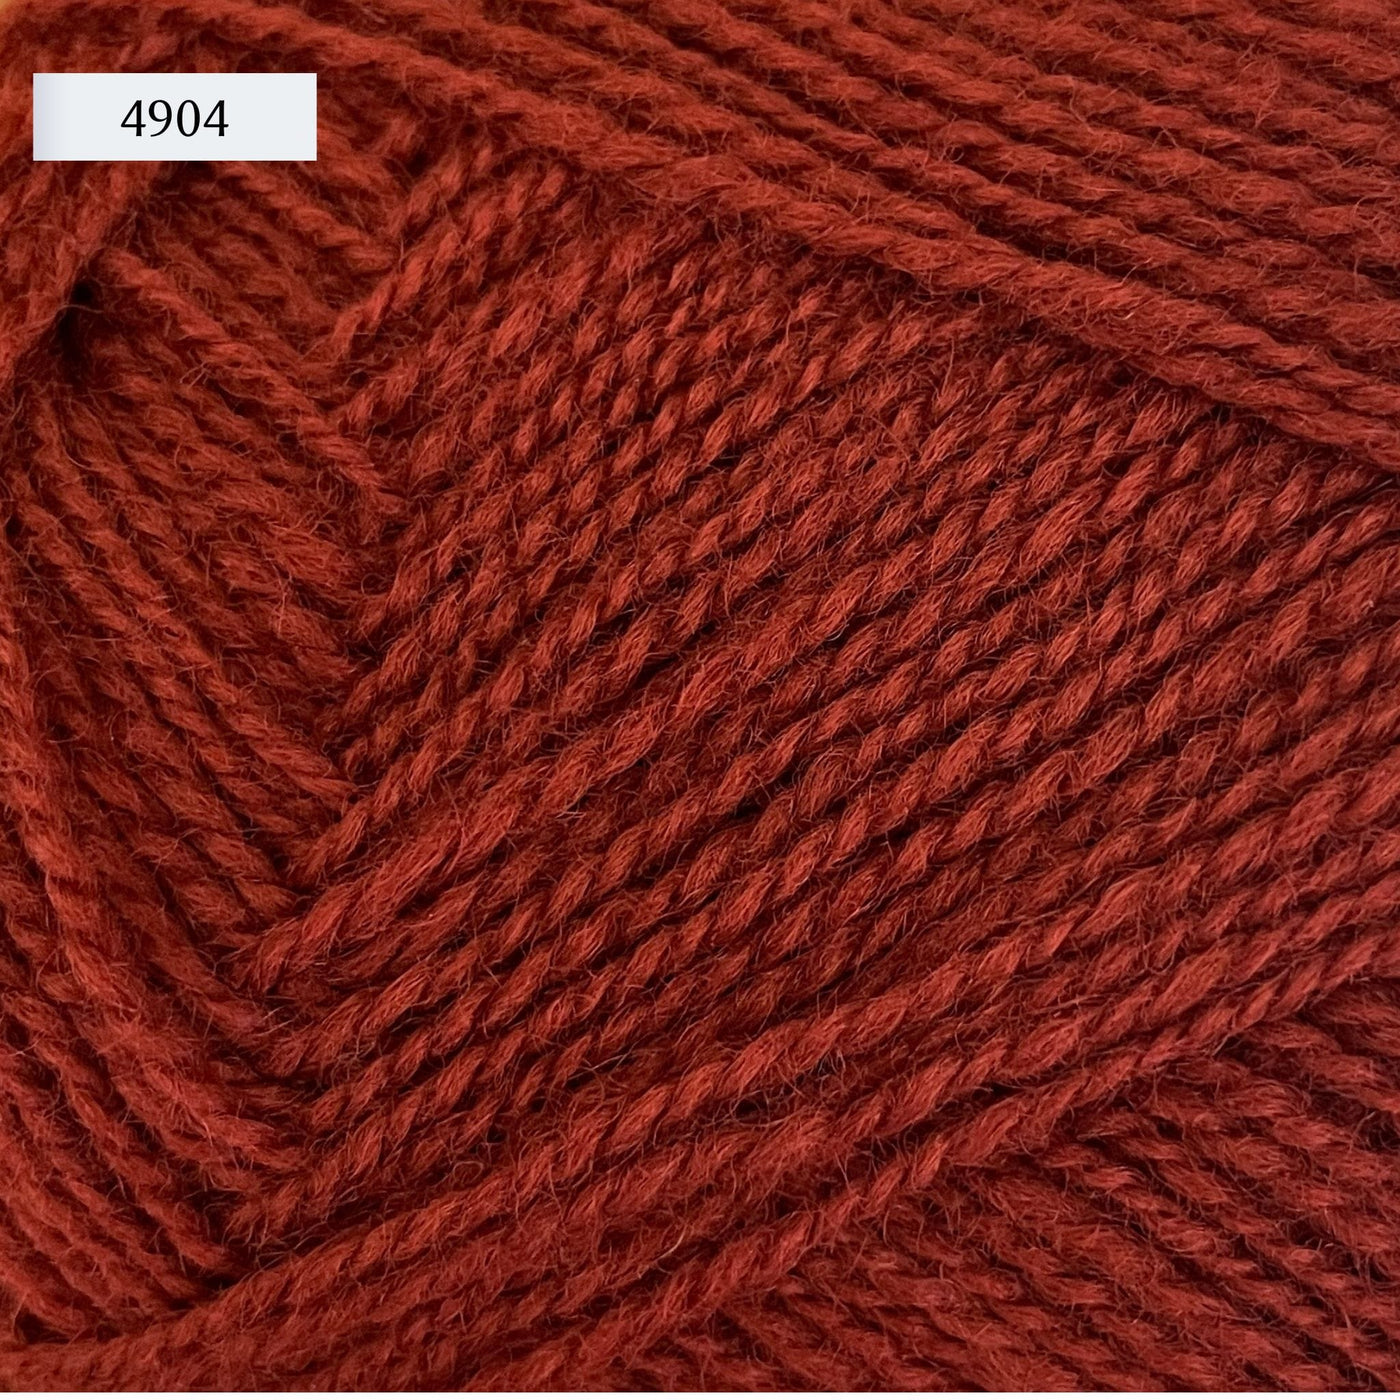 Rauma Gammelserie 2ply wool yarn, fingering weight, in color 4904, a rusty red